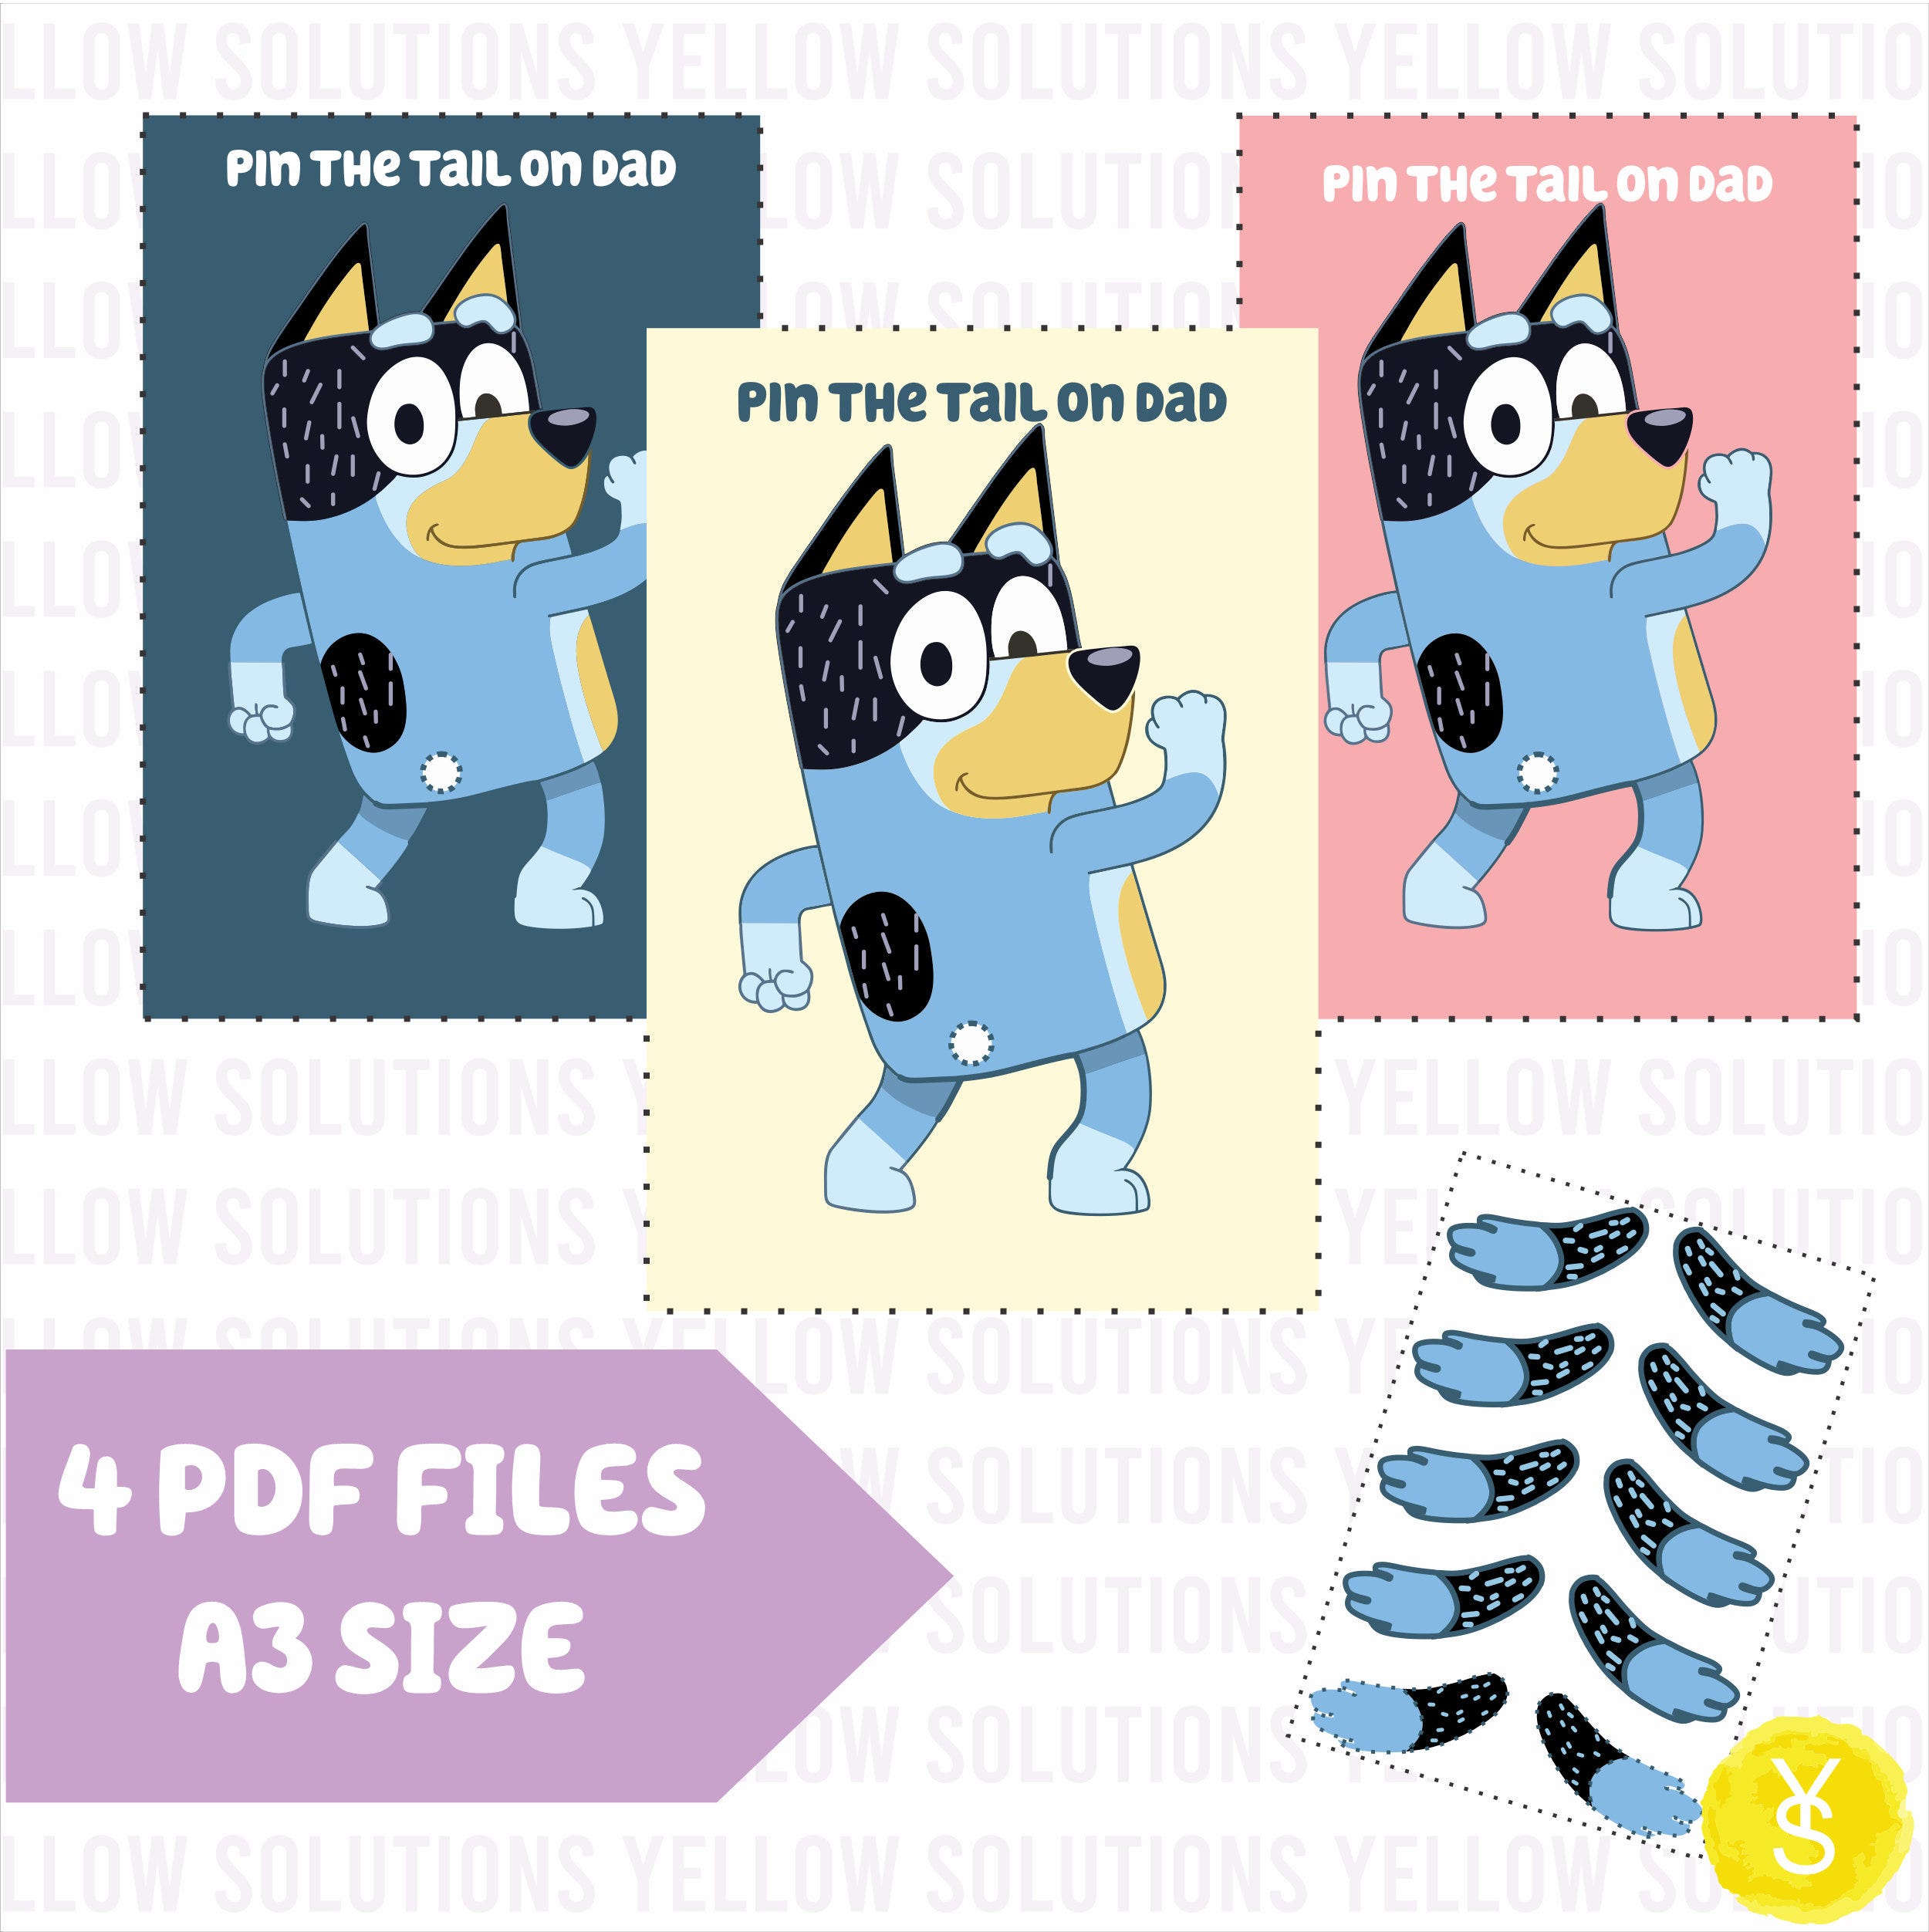 Printable - Pin the tail on dad - Bandit - Bluey themed party - A3 - Digital product - Party games